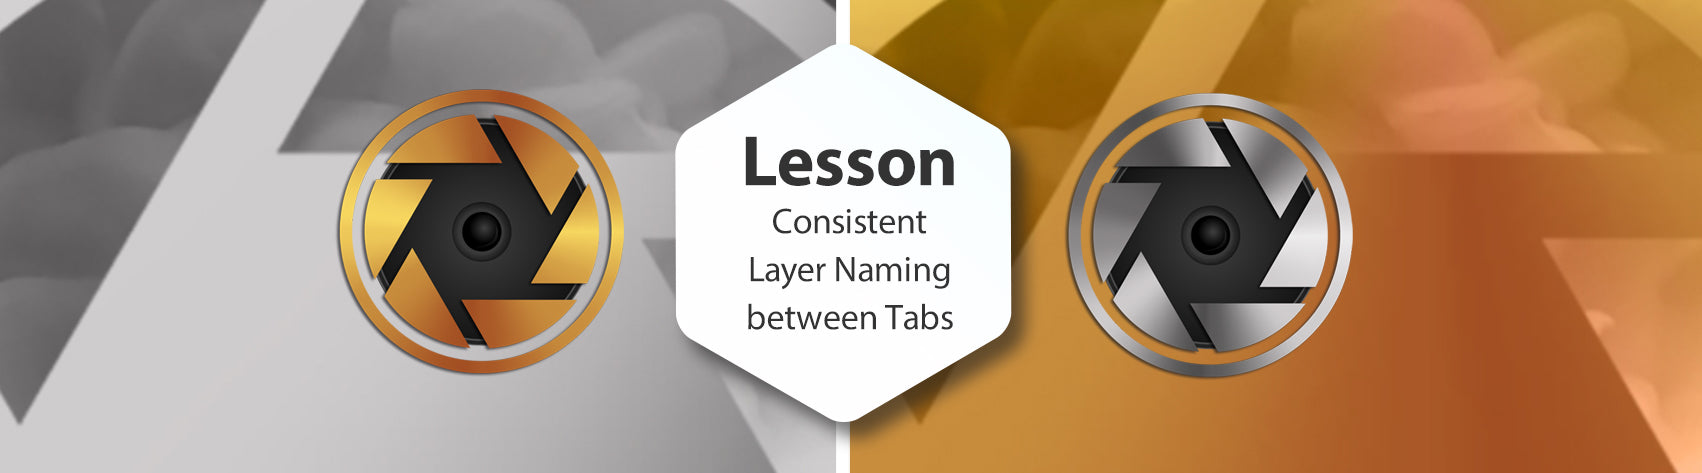 Lesson - Consistent Layer Naming between Tabs